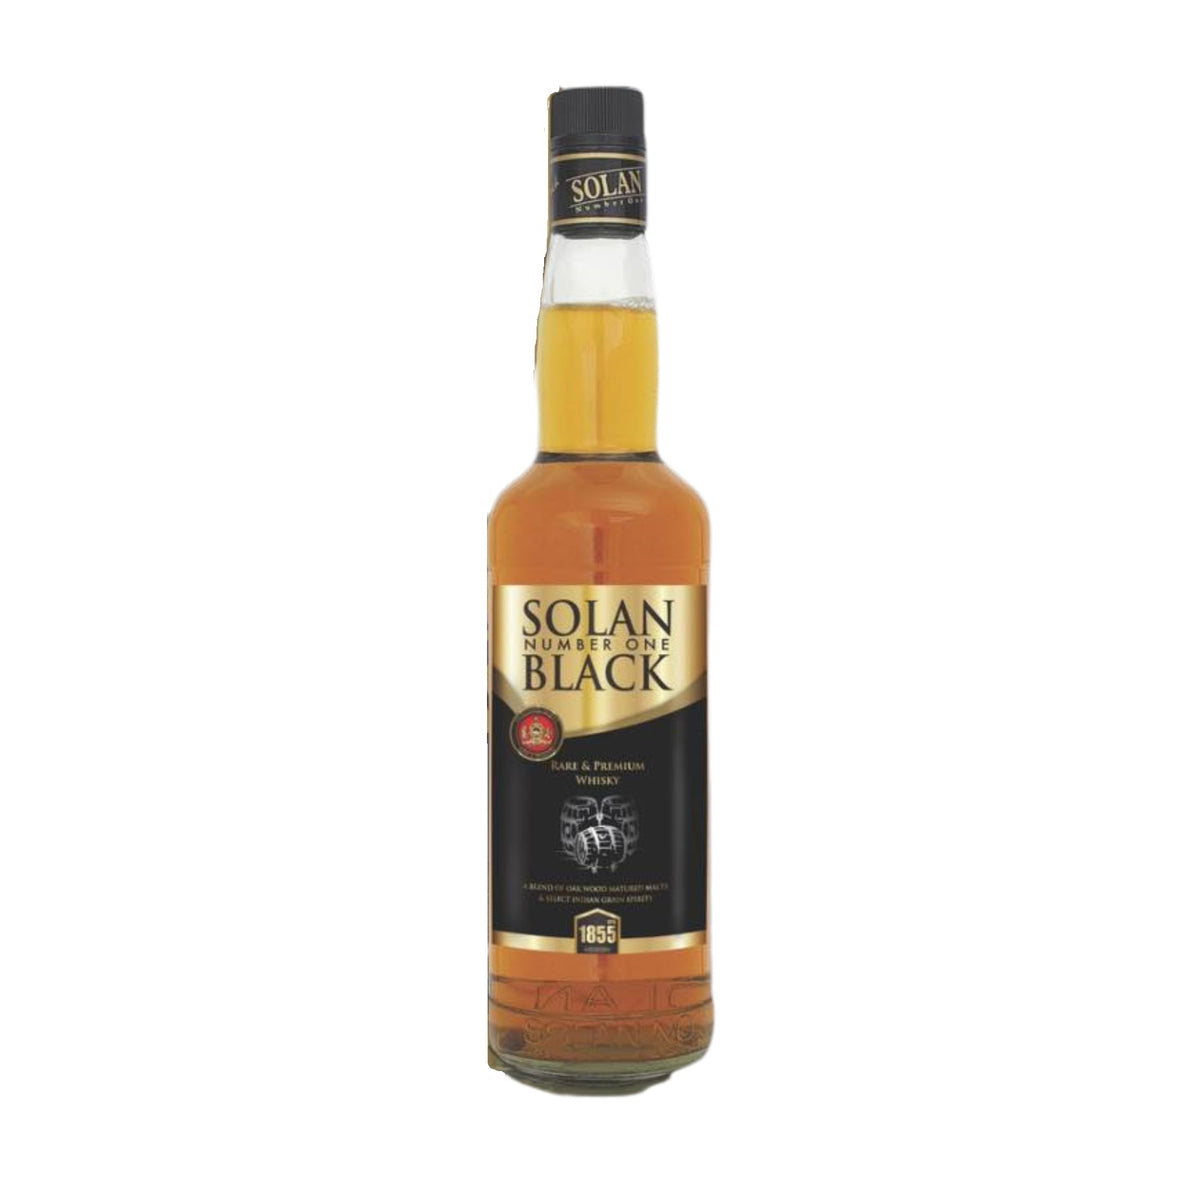 Solan Number One Black Rare and Premium Whisky